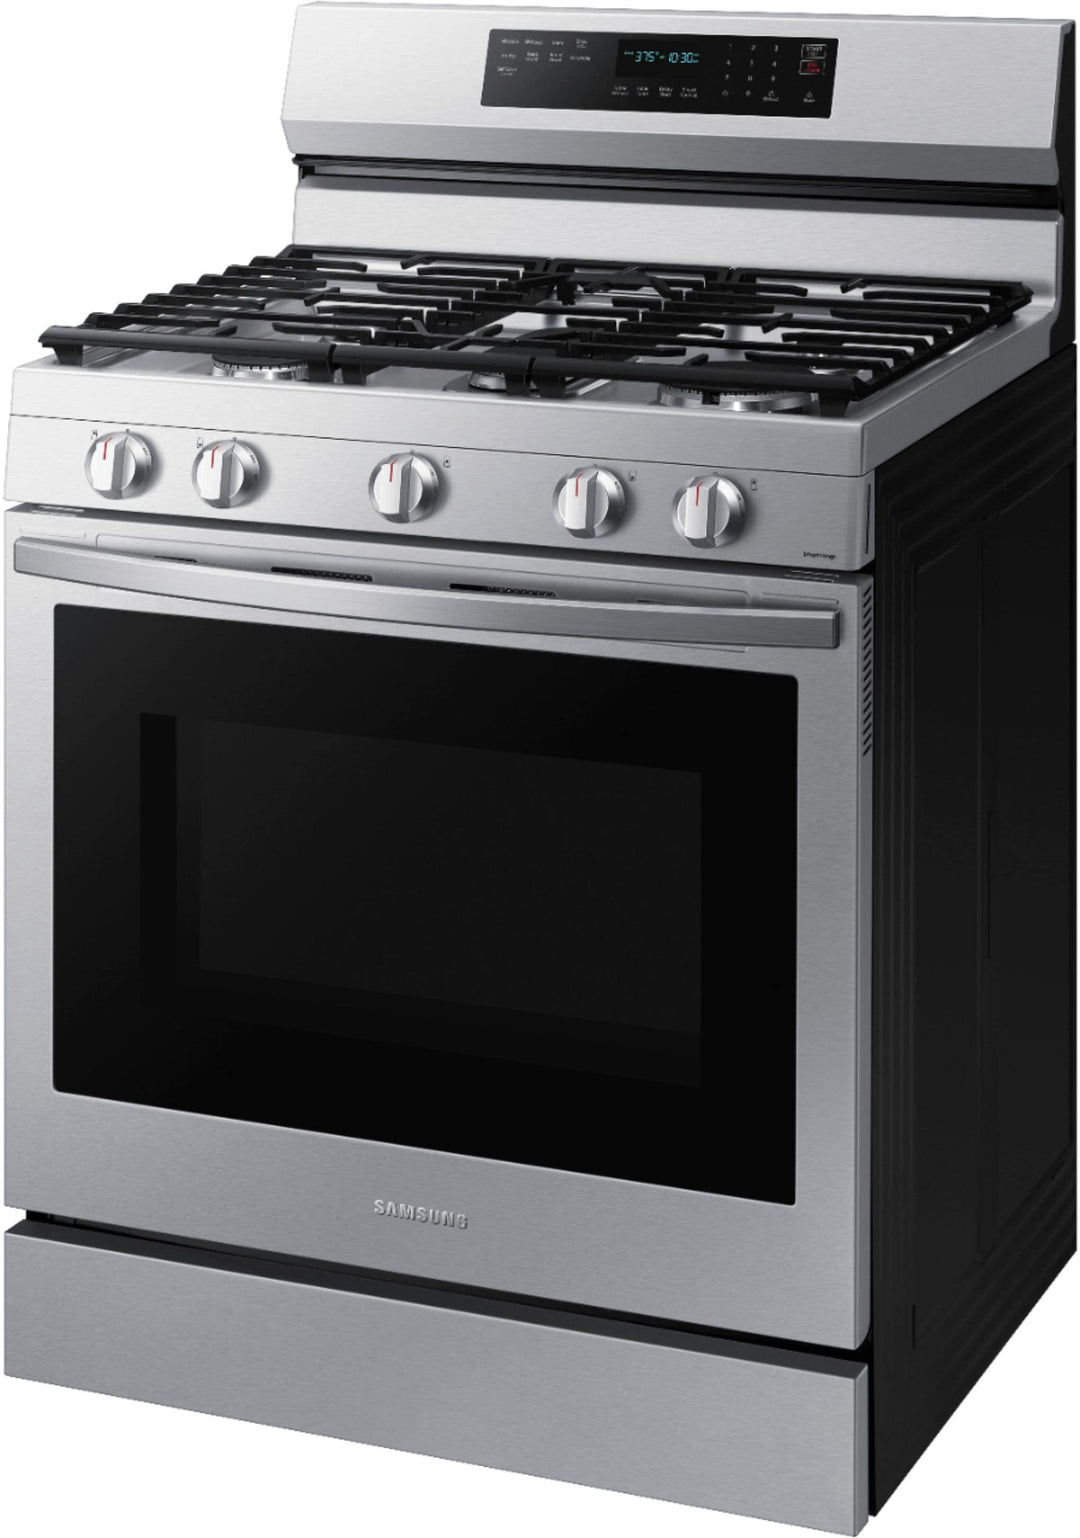 Samsung - 6.0 Cu. Ft. Freestanding Gas Convection+ Range with WiFi and No-Preheat Air Fry - Stainless steel_7